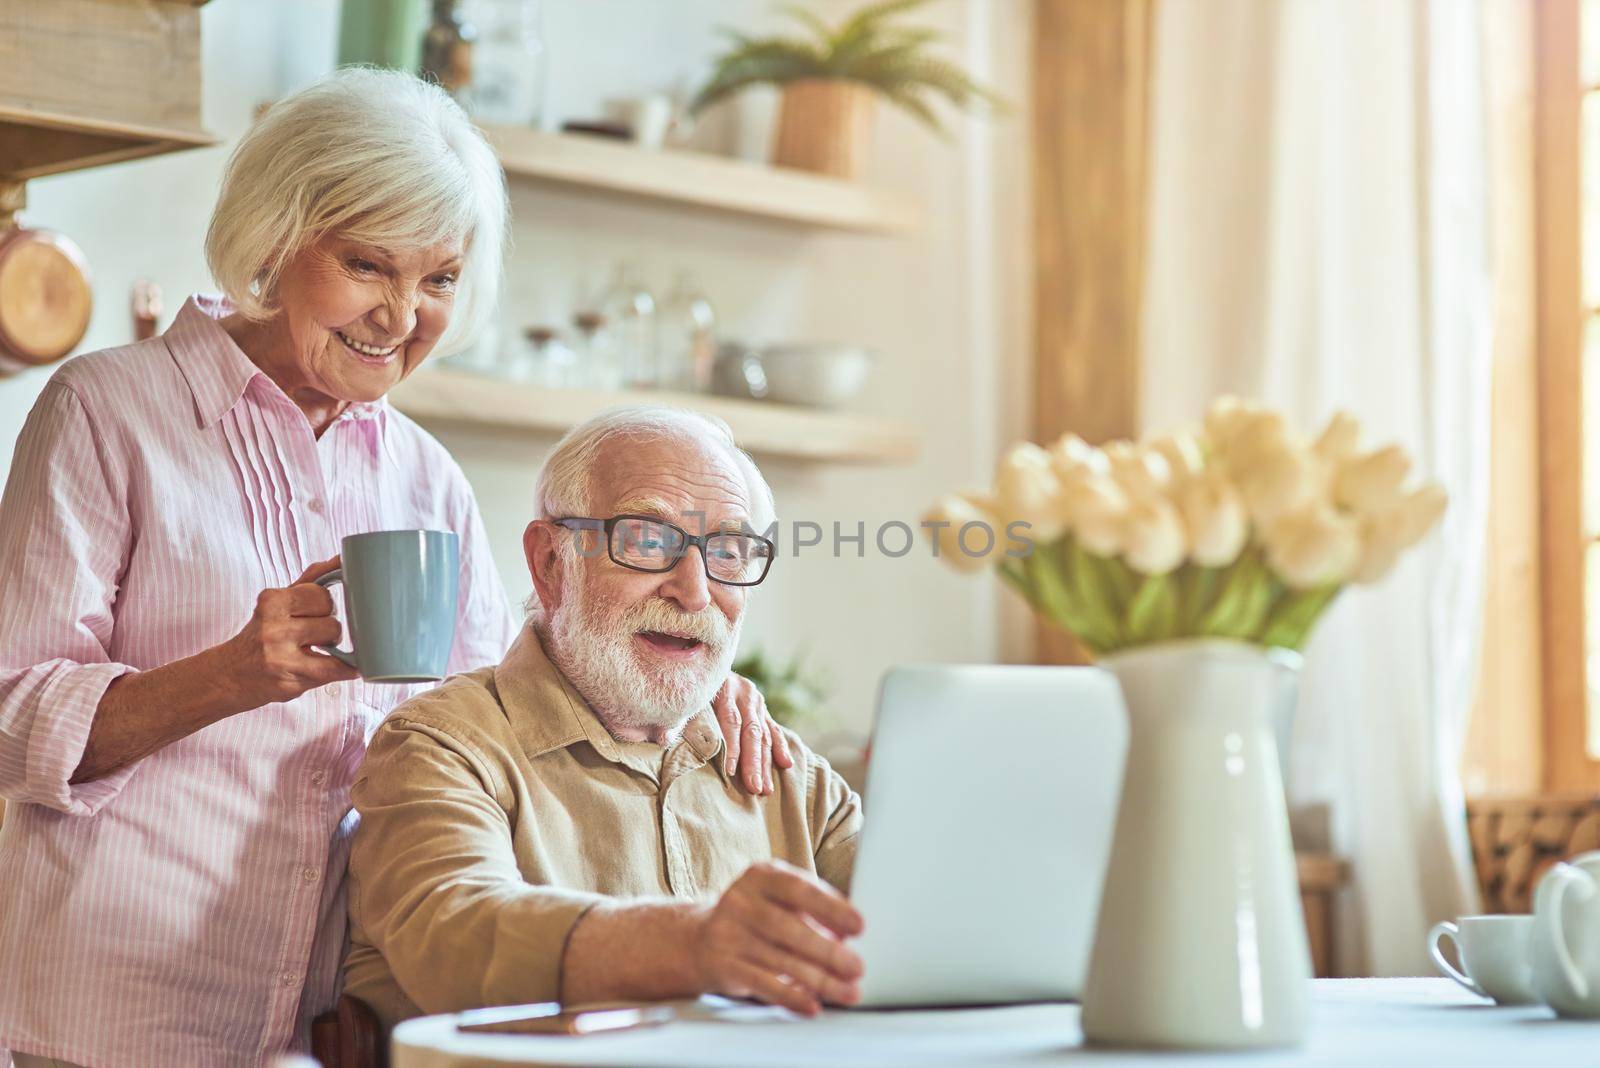 Smiling senior couple enjoying morning coffee while using laptop and watching video together. Domestic lifestyle concept